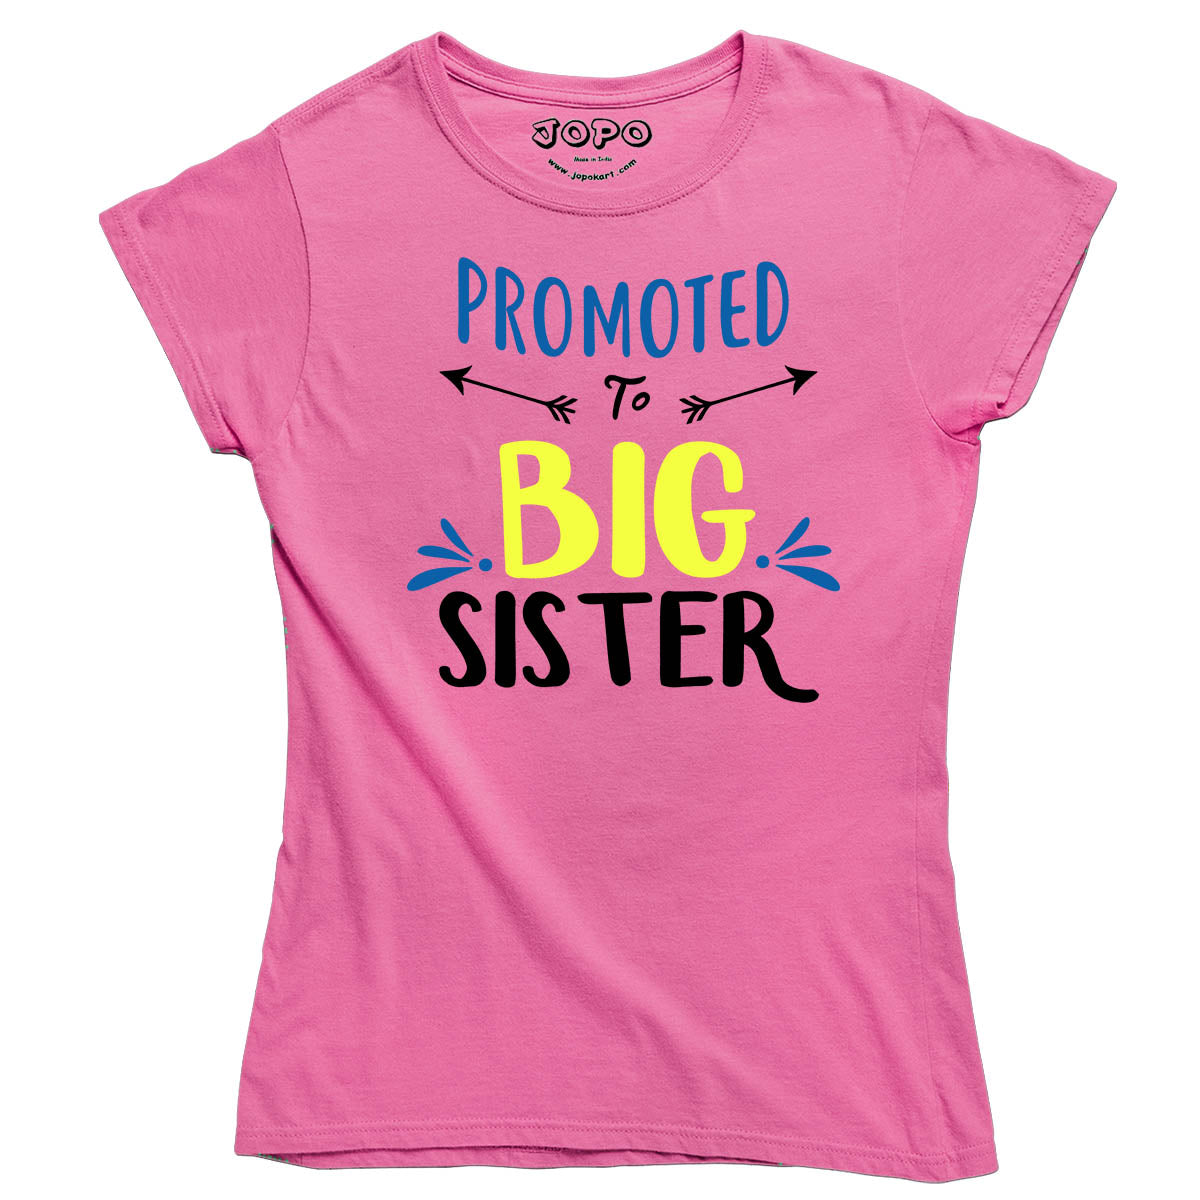 Promoted to big Sister pink